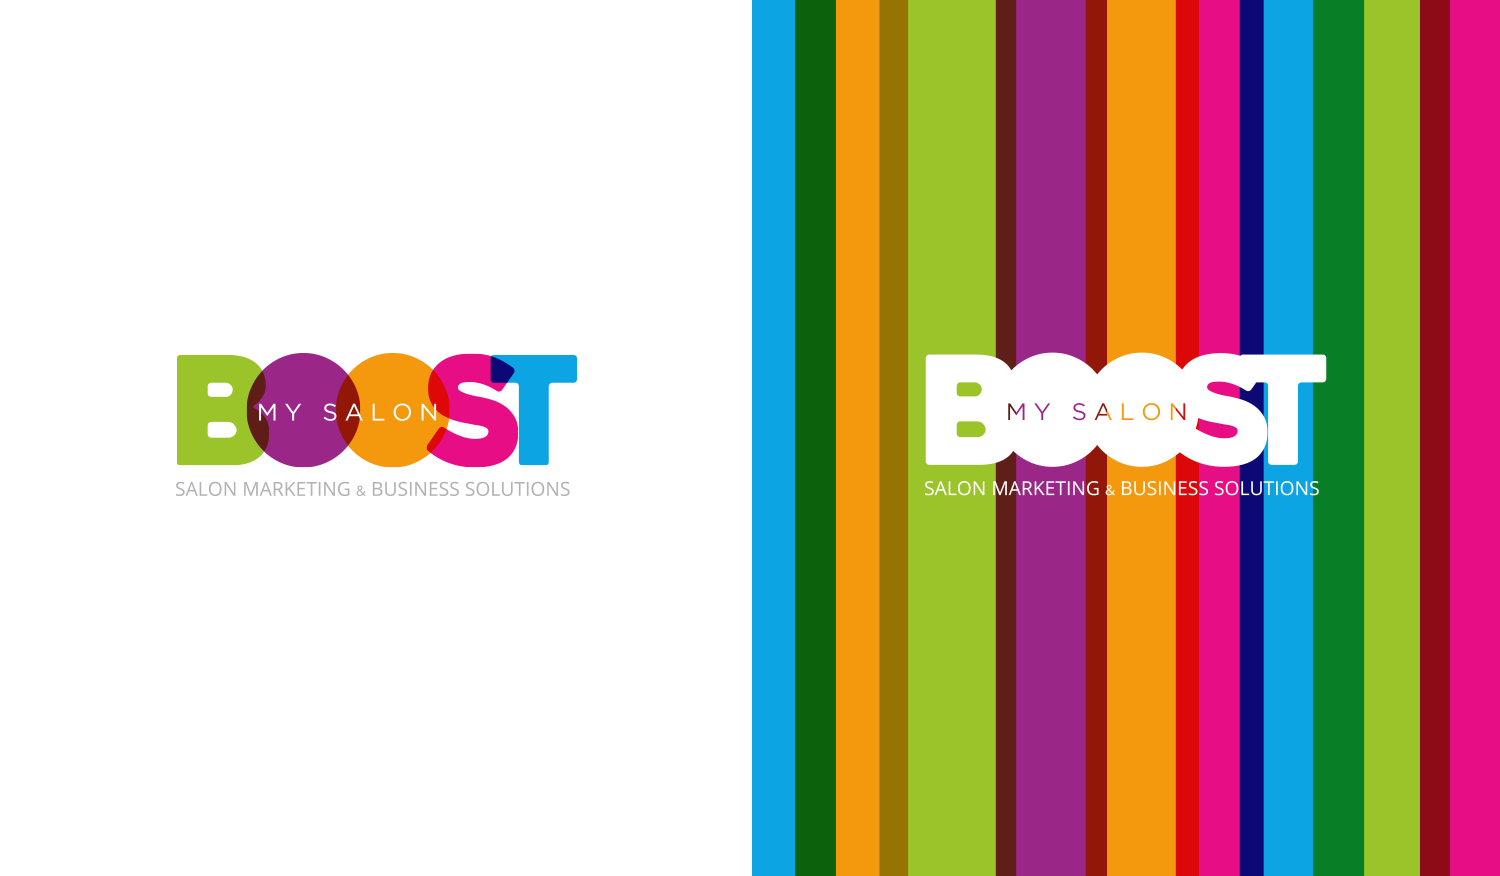 BOOSTmySALON Logo design in both full colour and white knock out